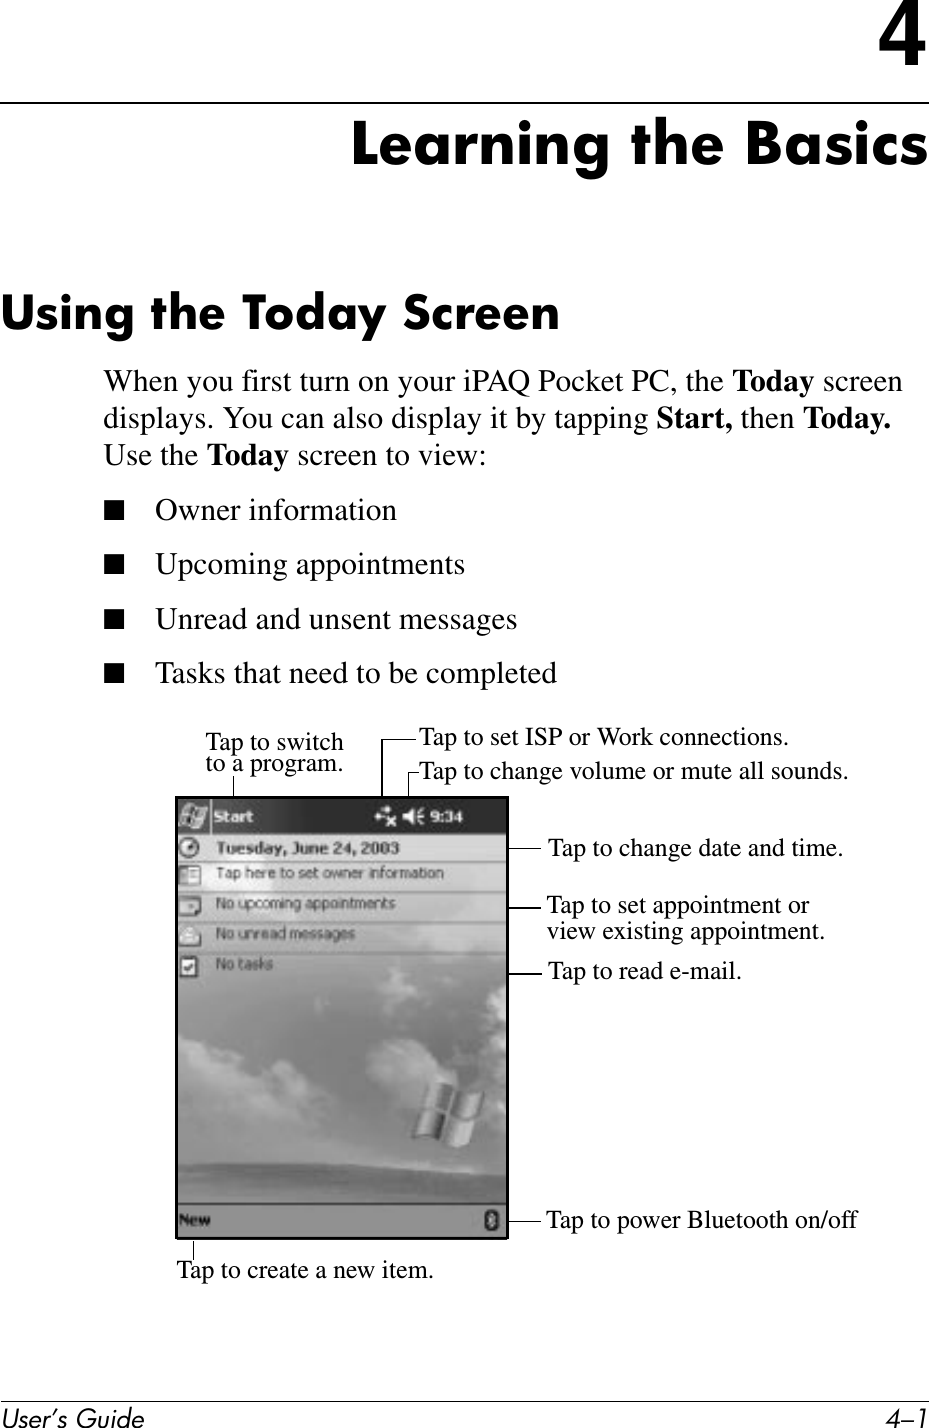 User’s Guide 4–14Learning the BasicsUsing the Today ScreenWhen you first turn on your iPAQ Pocket PC, the Today screen displays. You can also display it by tapping Start, then Today. Use the Today screen to view:■Owner information■Upcoming appointments■Unread and unsent messages■Tasks that need to be completedTap to switchto a program. Tap to change volume or mute all sounds.Tap to set ISP or Work connections.Tap to change date and time.Tap to set appointment or view existing appointment.Tap to read e-mail.Tap to create a new item.Tap to power Bluetooth on/off